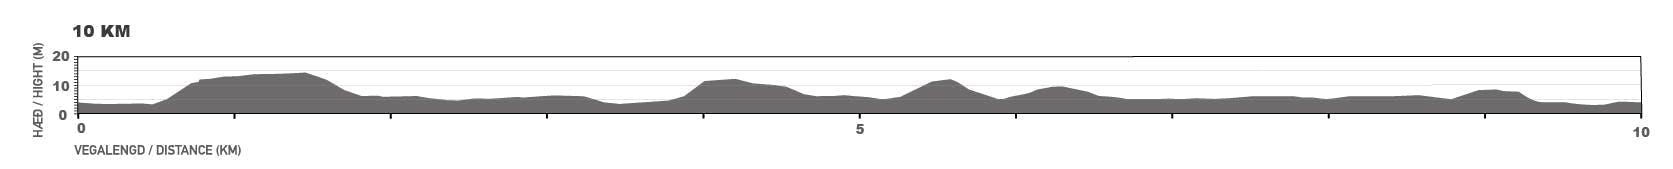 Elevation map for the 10 km course.